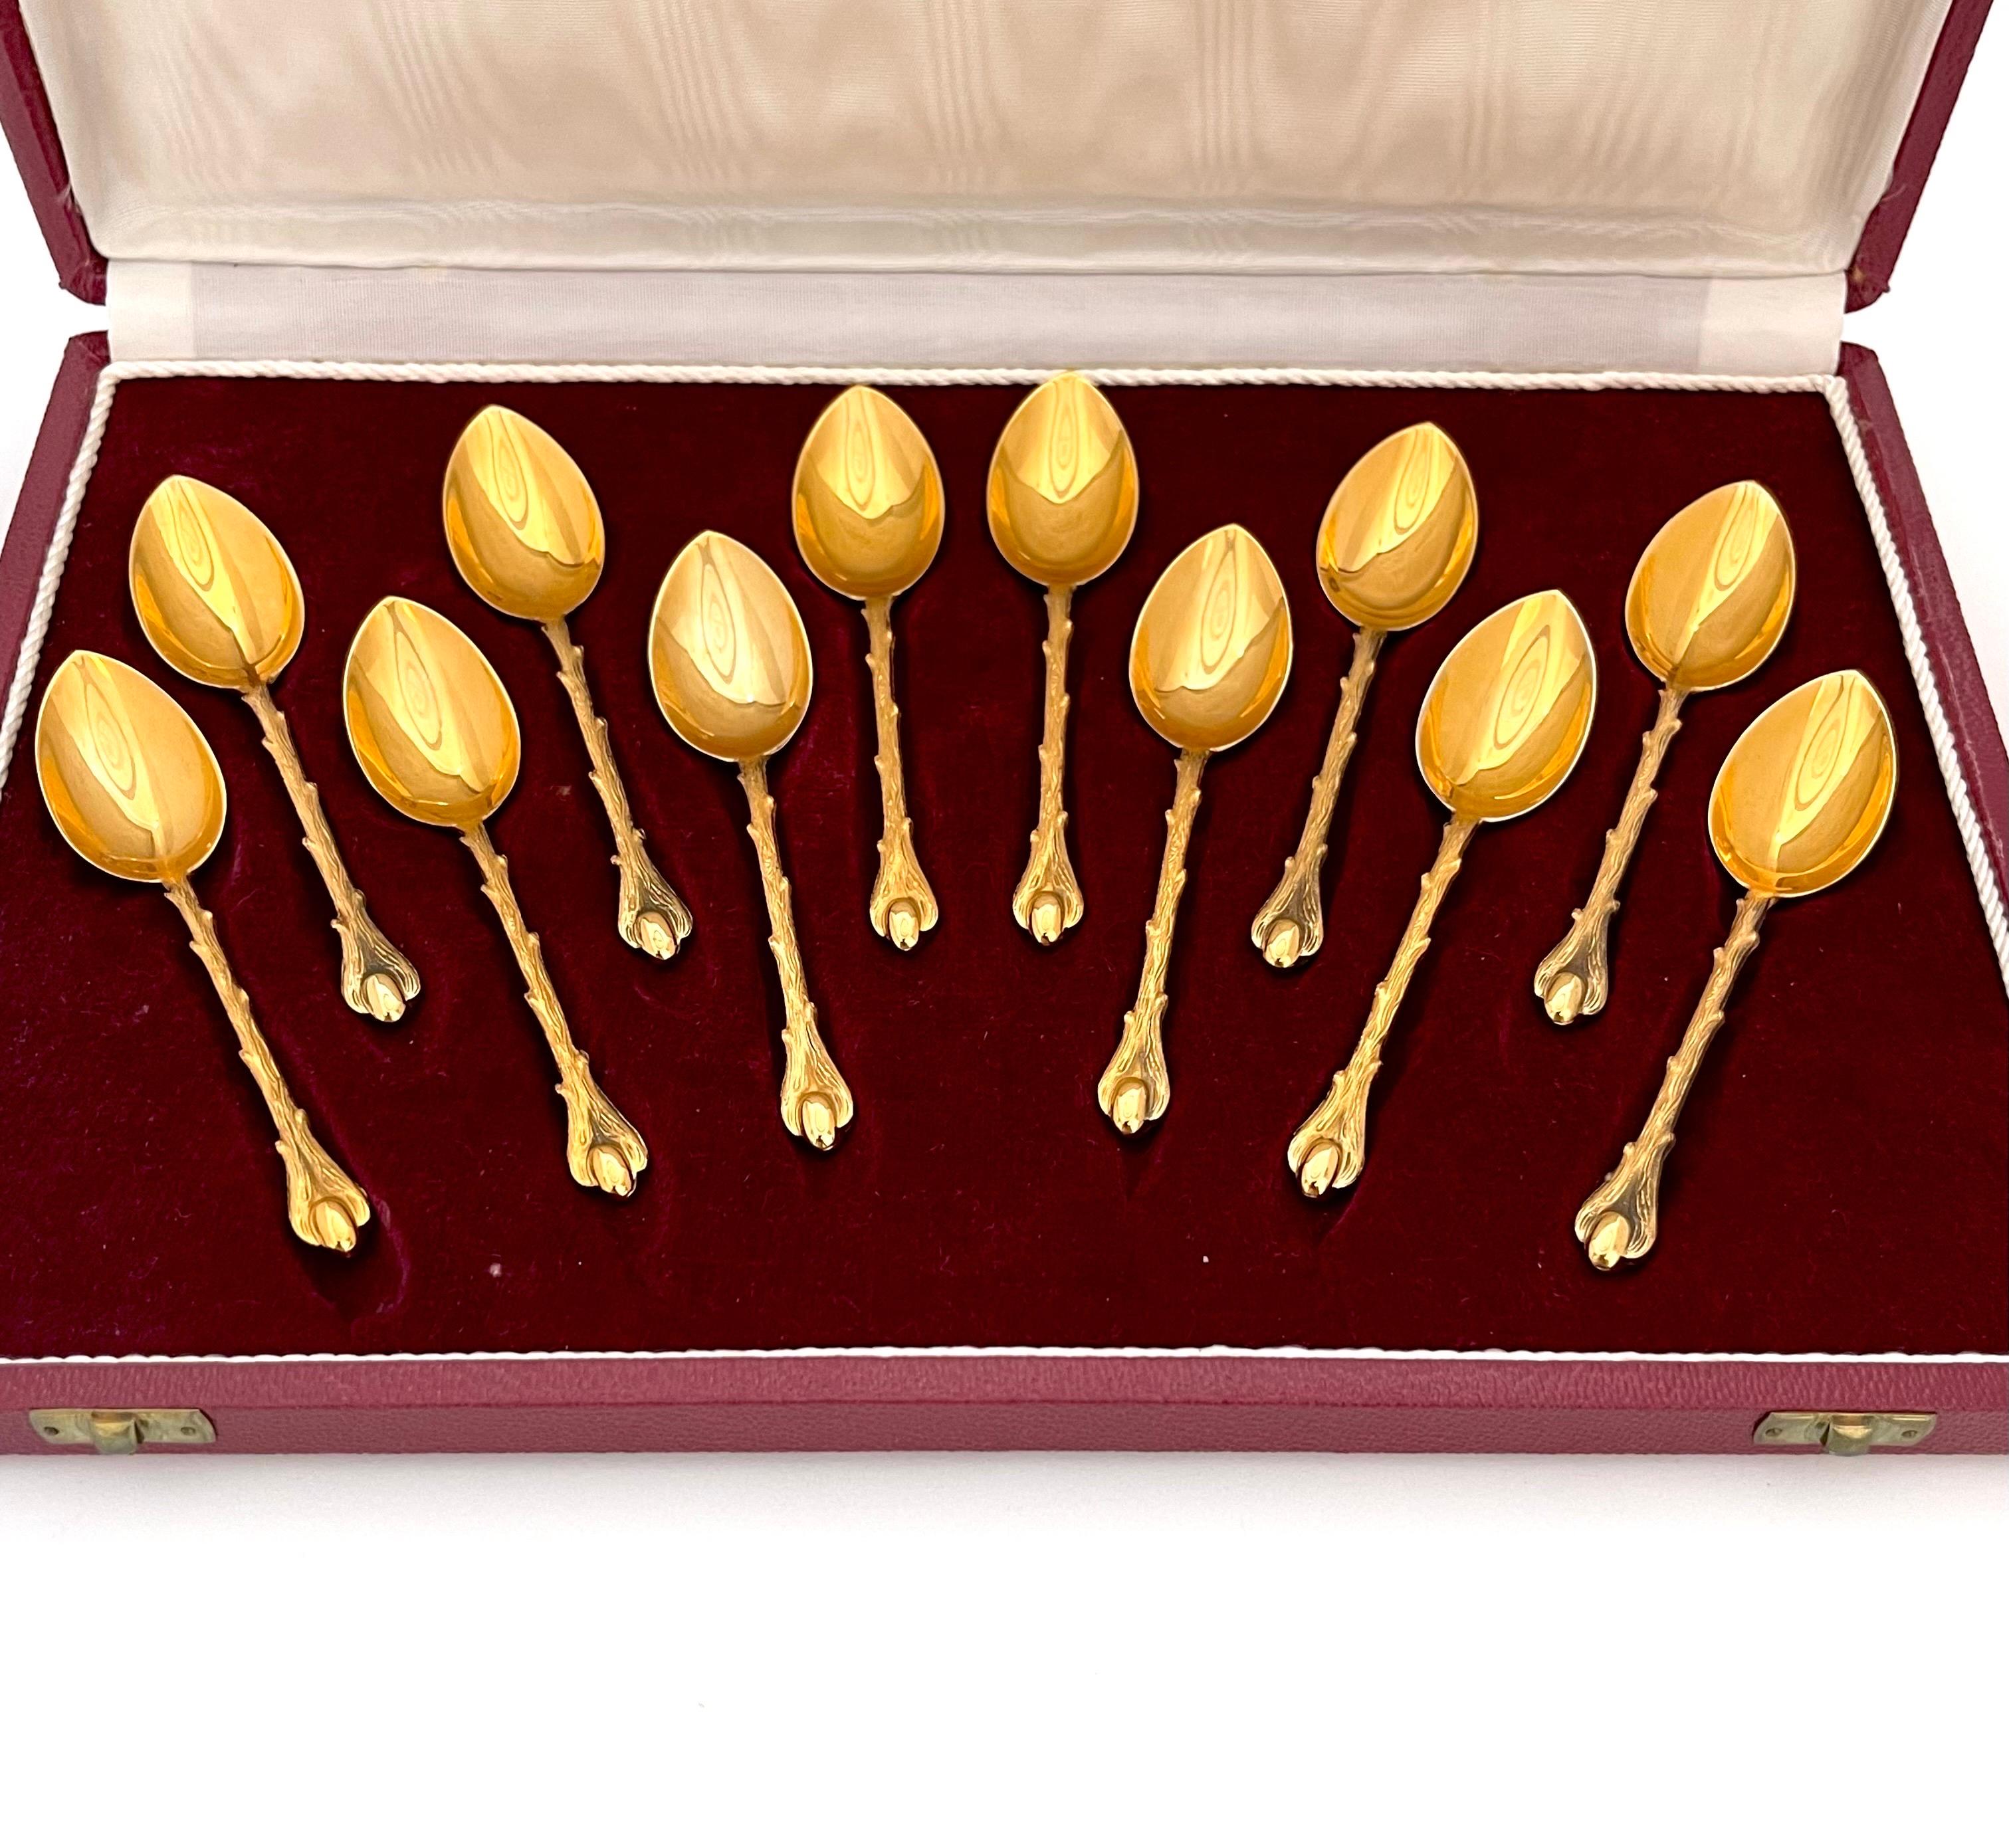  Teaspoons 12 Items gold covered by Saint Medard France 1950 For Sale 3